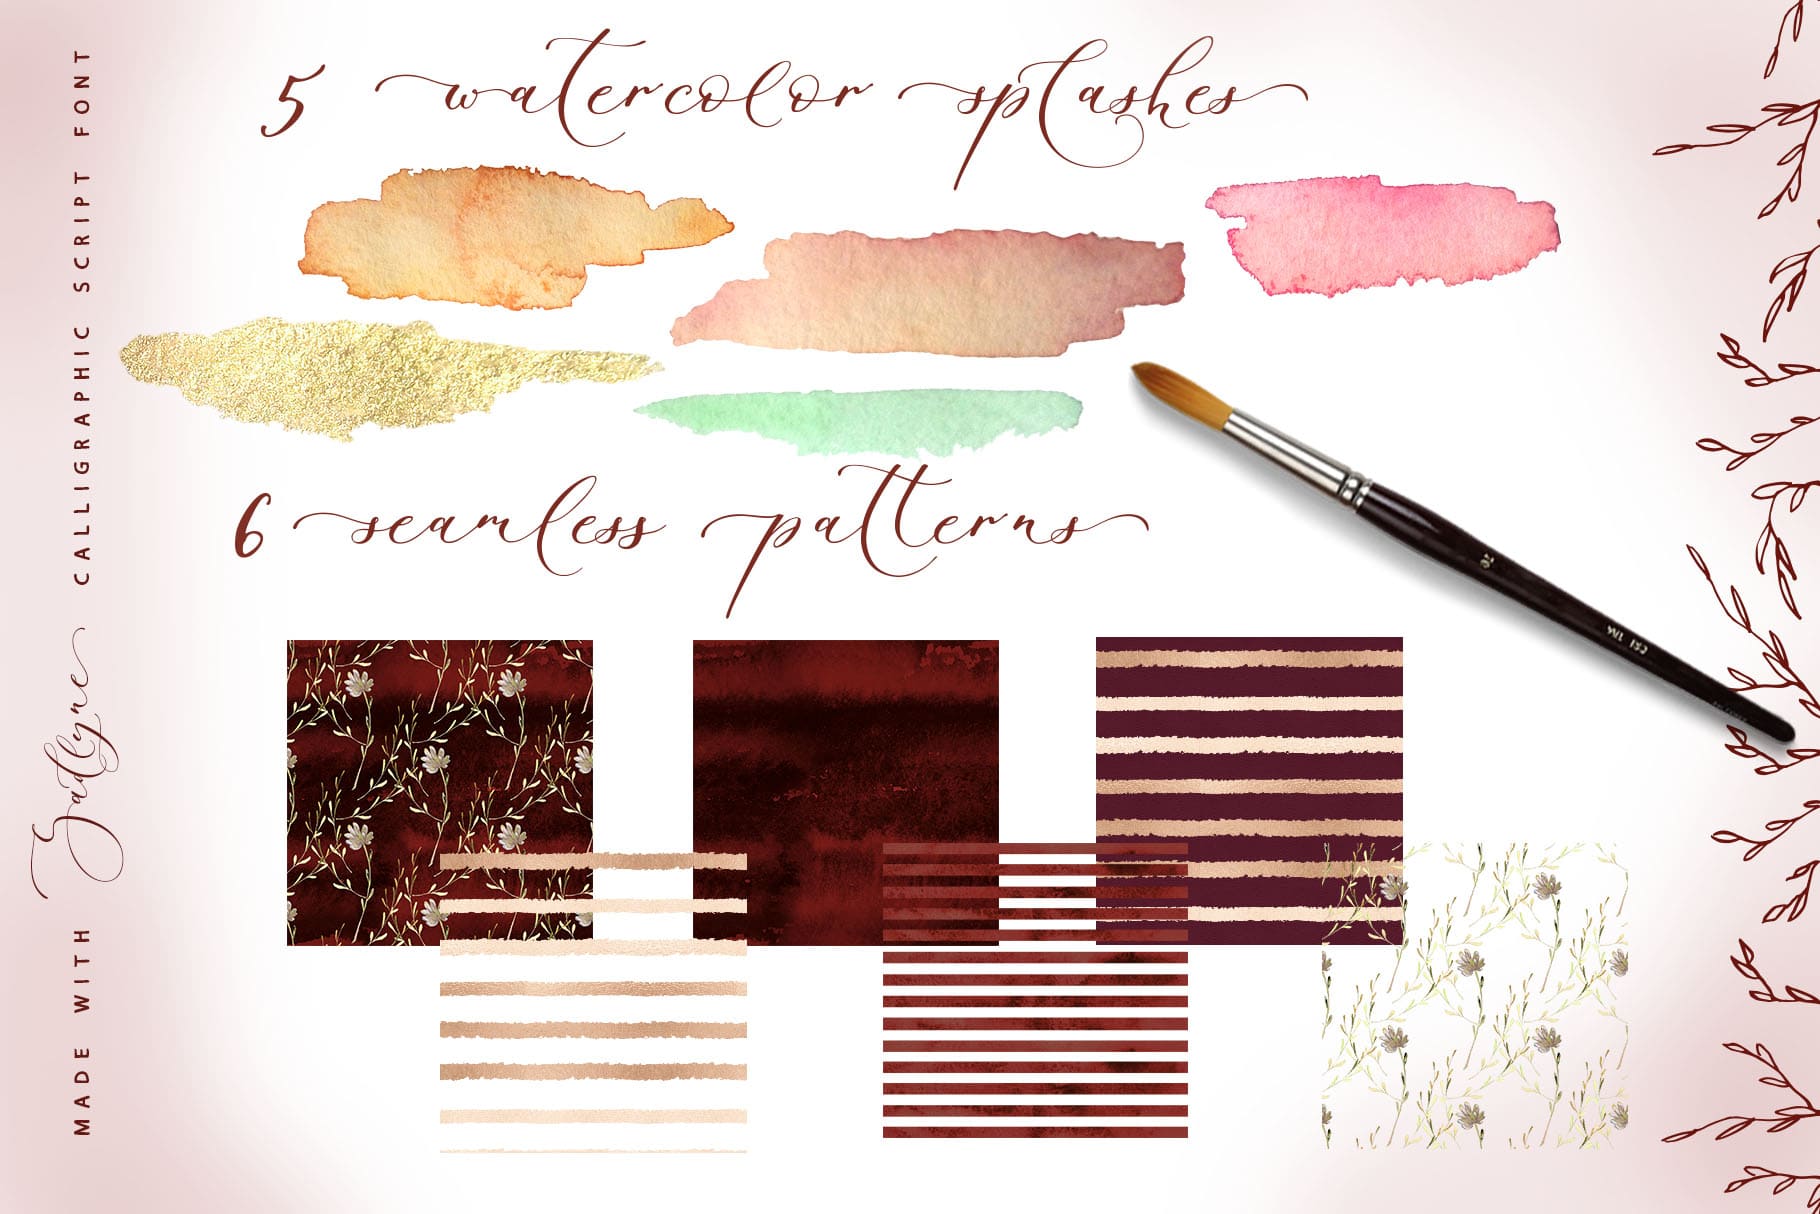 Watercolor brushes in different colors.